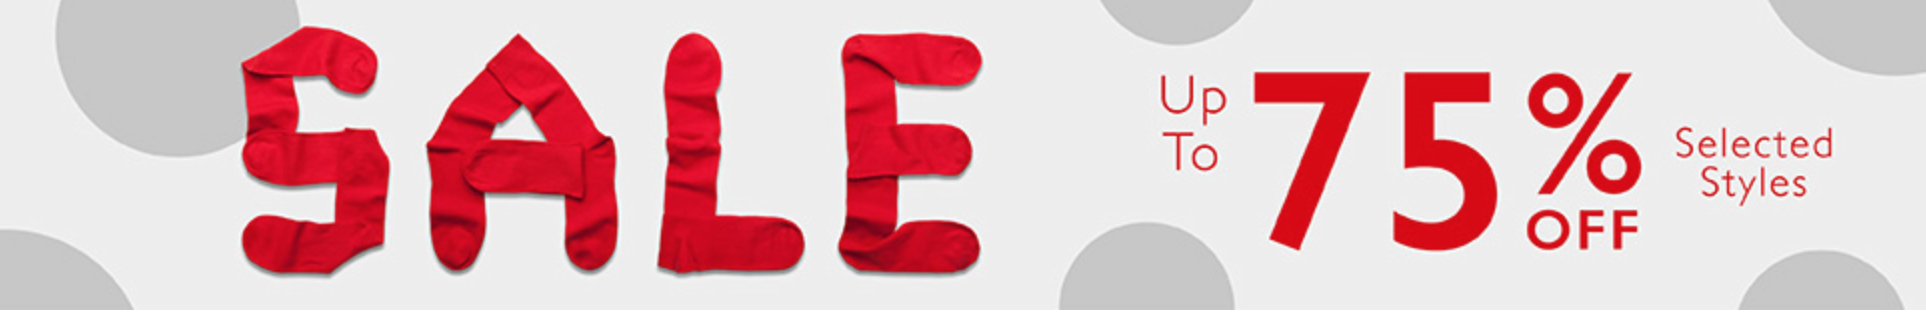 Sock Shop: Sale up to 75% off selected styles of socks